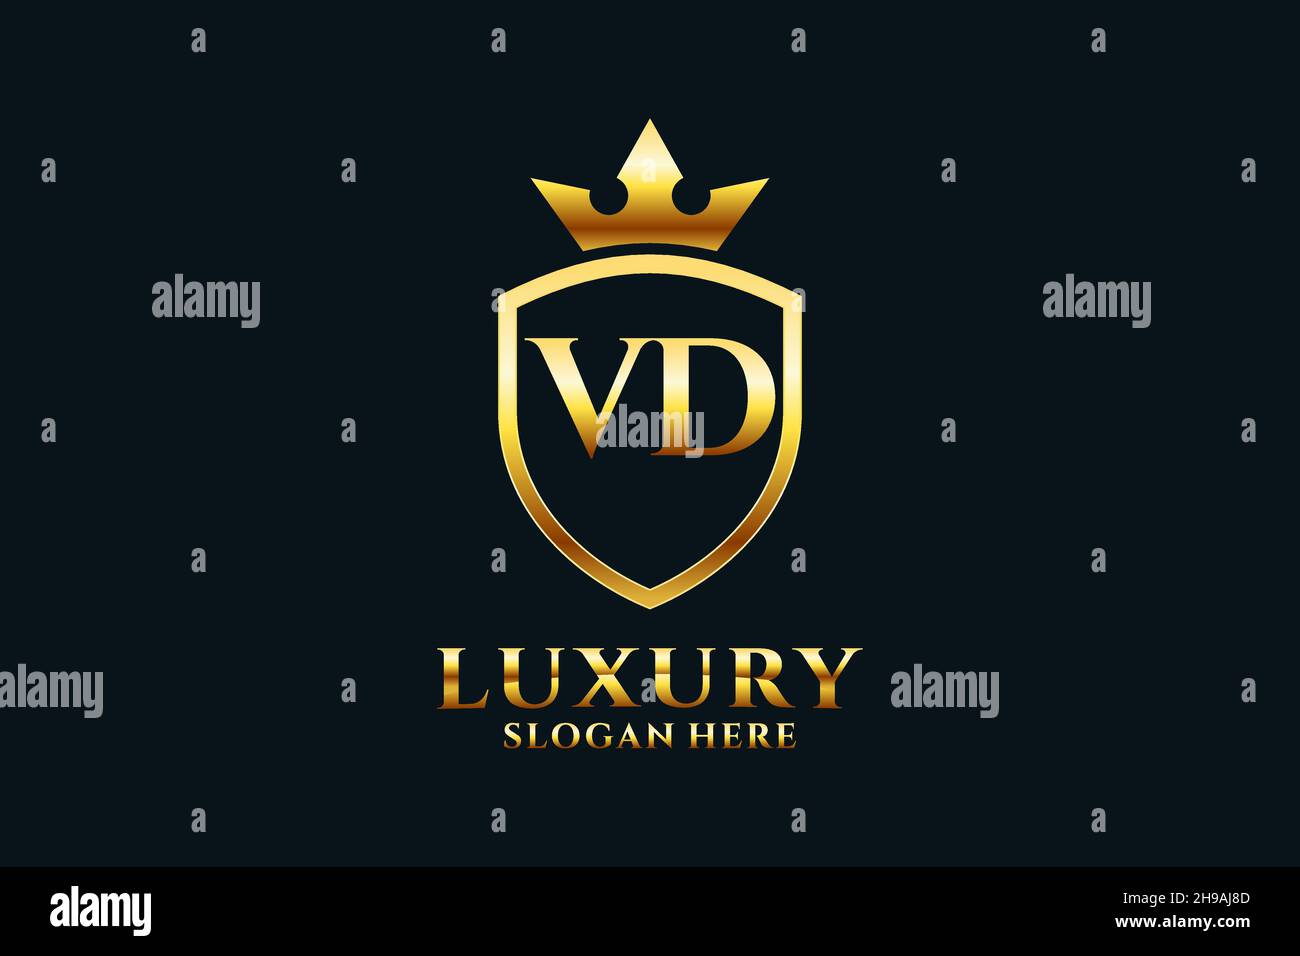 VD elegant luxury monogram logo or badge template with scrolls and royal crown - perfect for luxurious branding projects Stock Vector